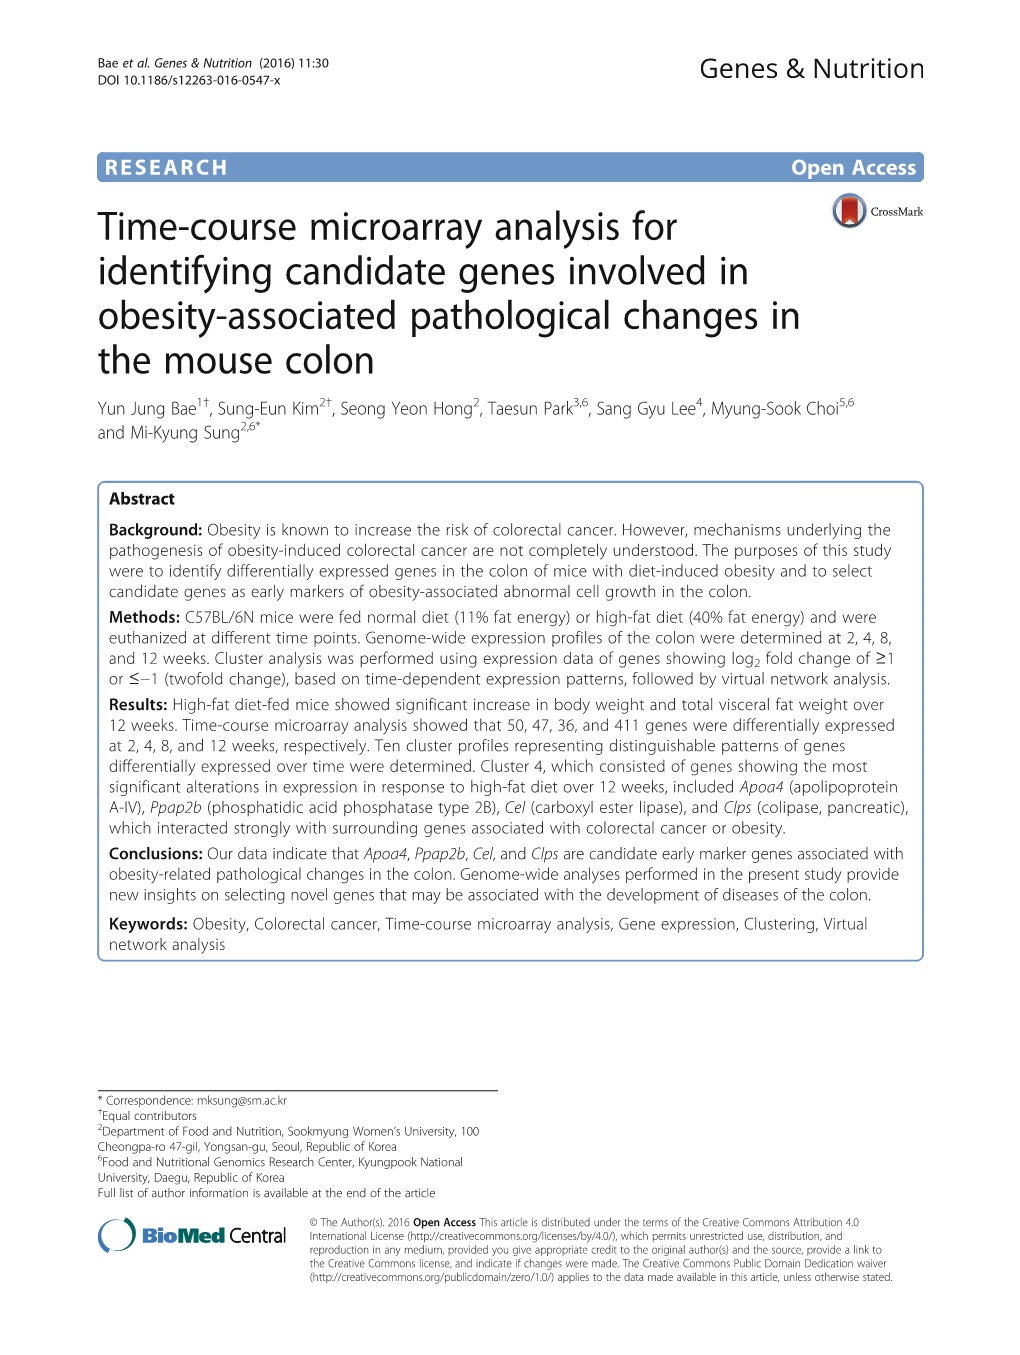 Time-Course Microarray Analysis for Identifying Candidate Genes